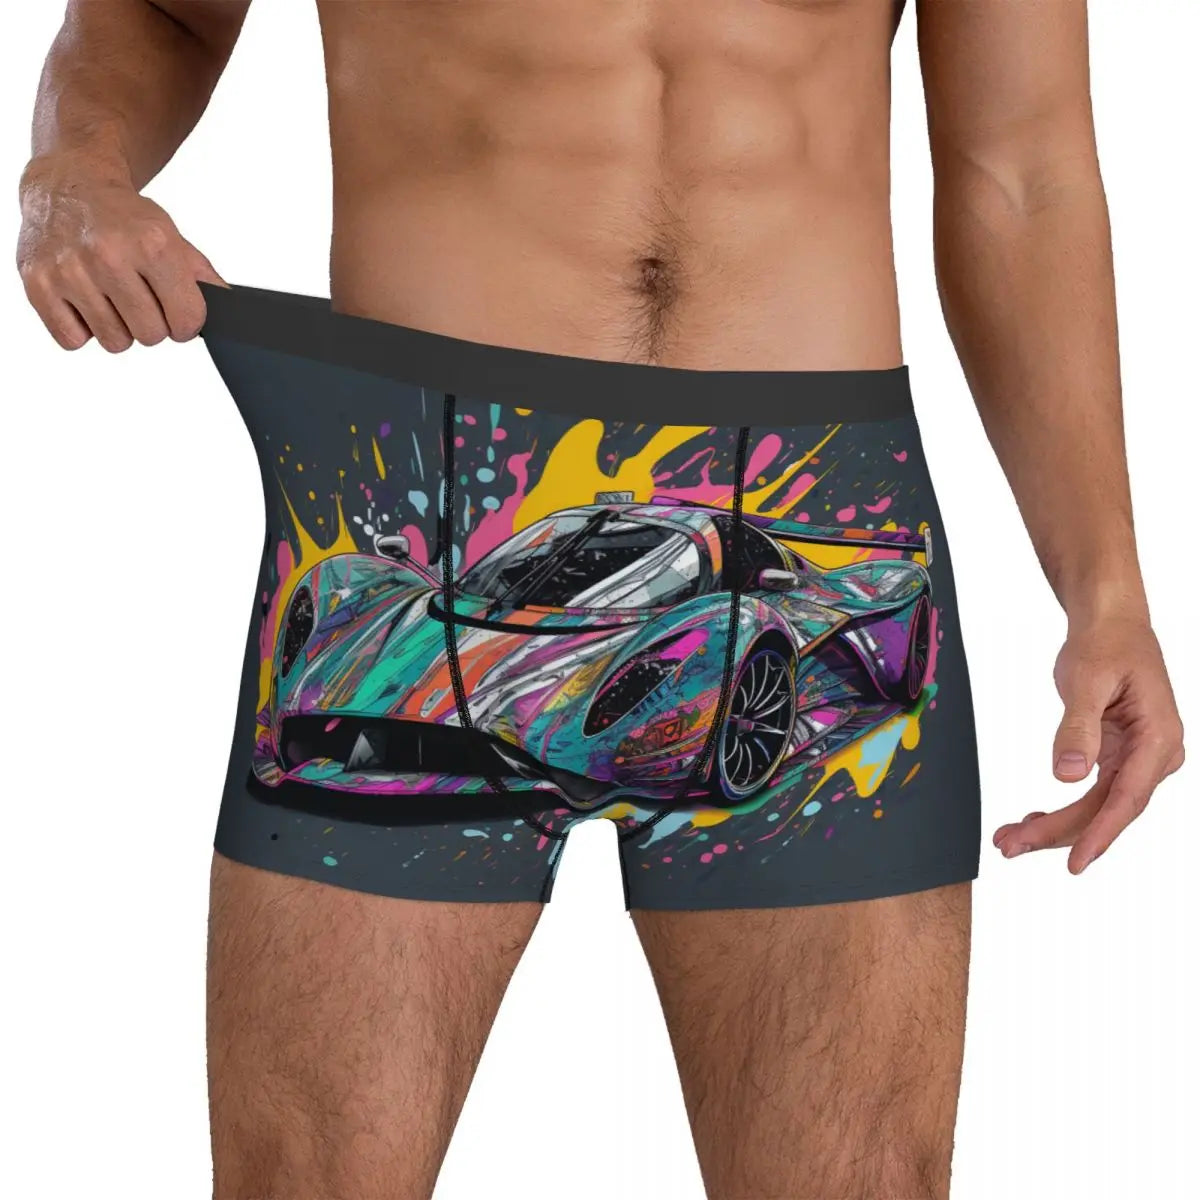 Dazzling Sports Car Underwear Grafitti Psychadelic Pouch Quality Boxershorts Sublimation Shorts Briefs Cute Males Underpants